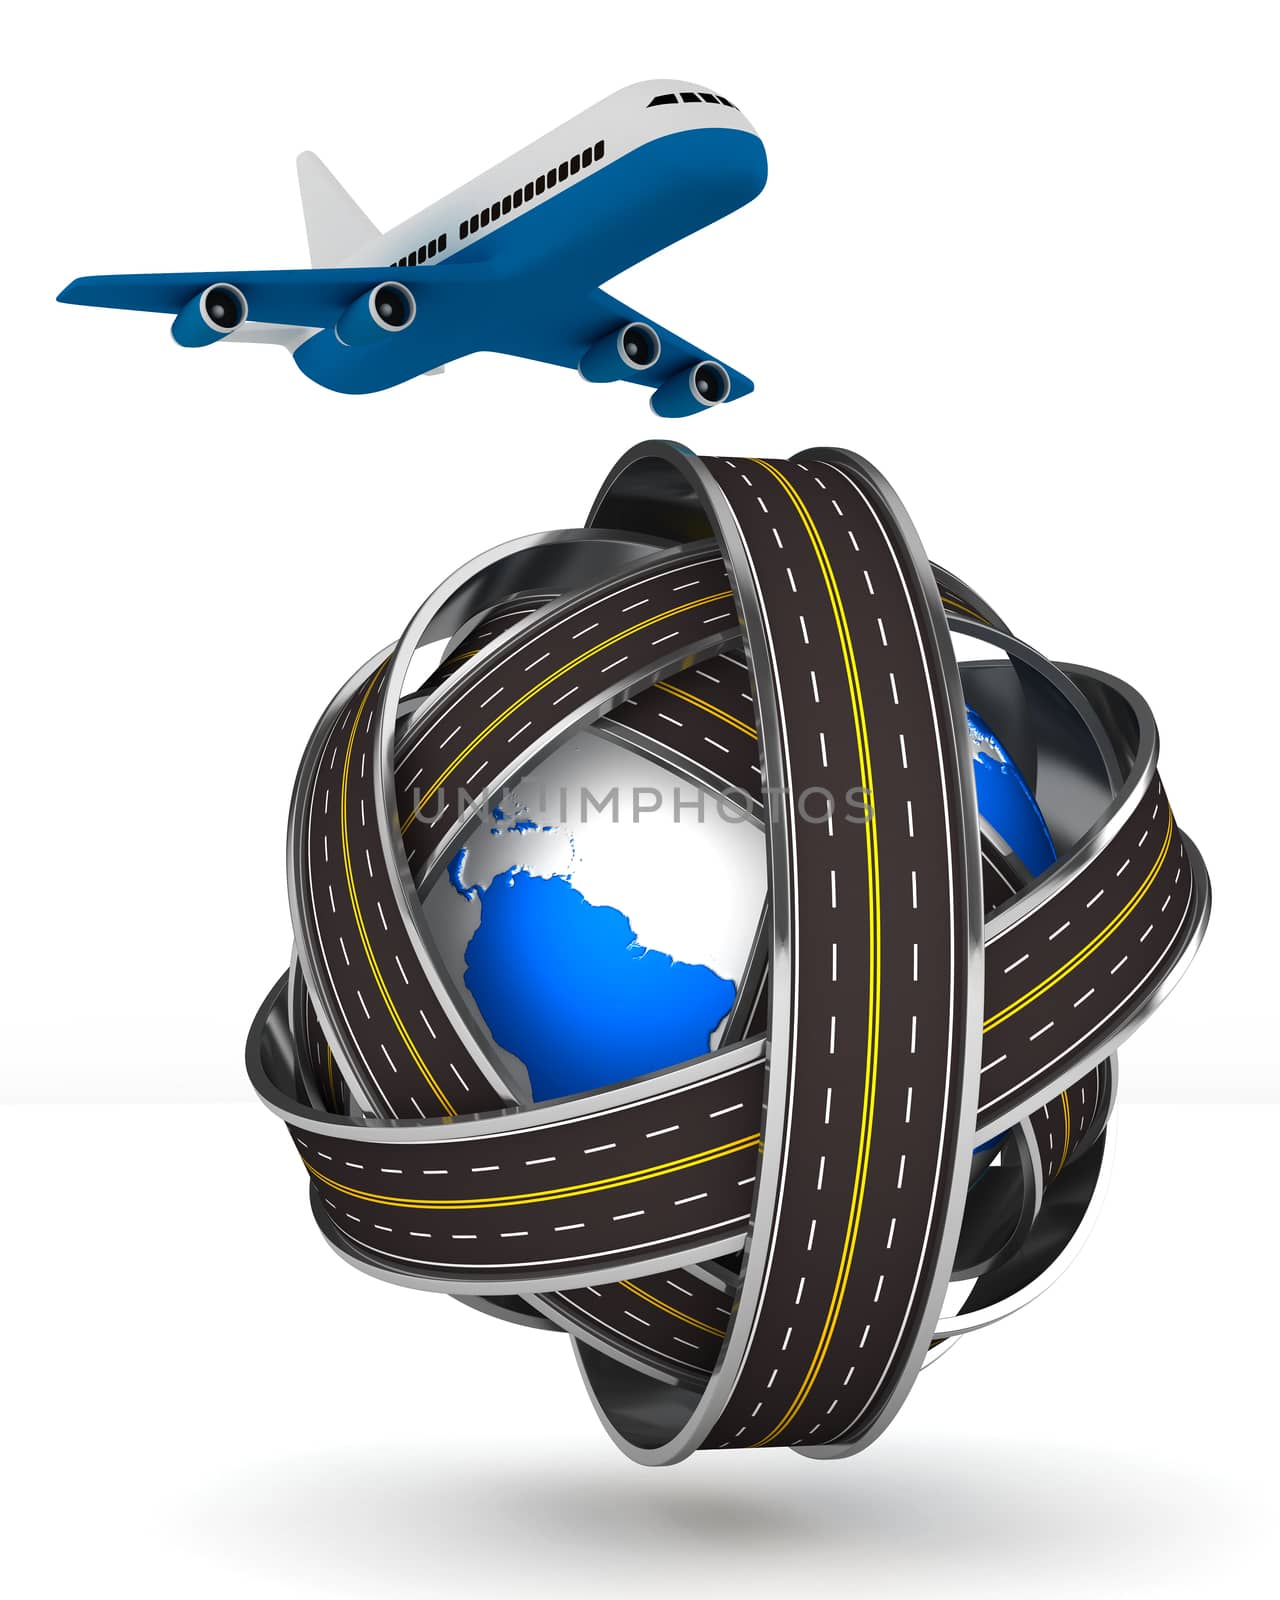 Roads round globe and airplane on white background. Isolated 3D image